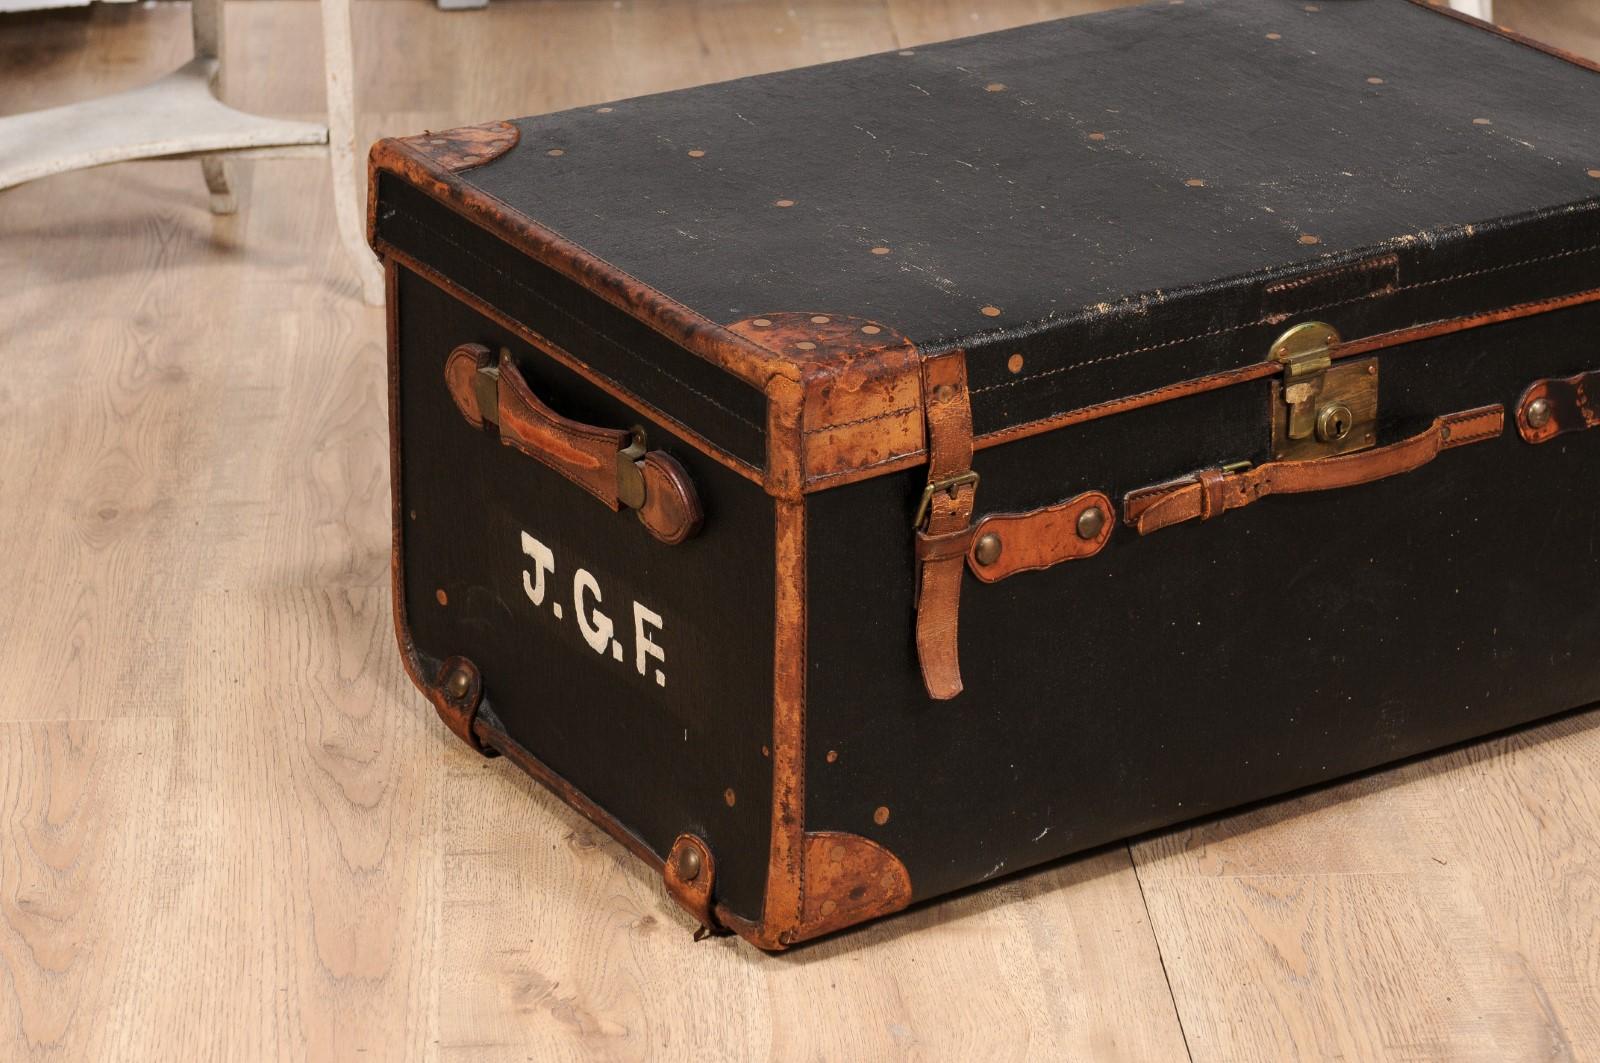 Leather English Victorian Period 19th Century Black Traveling Trunk With Initials J.G.F. For Sale